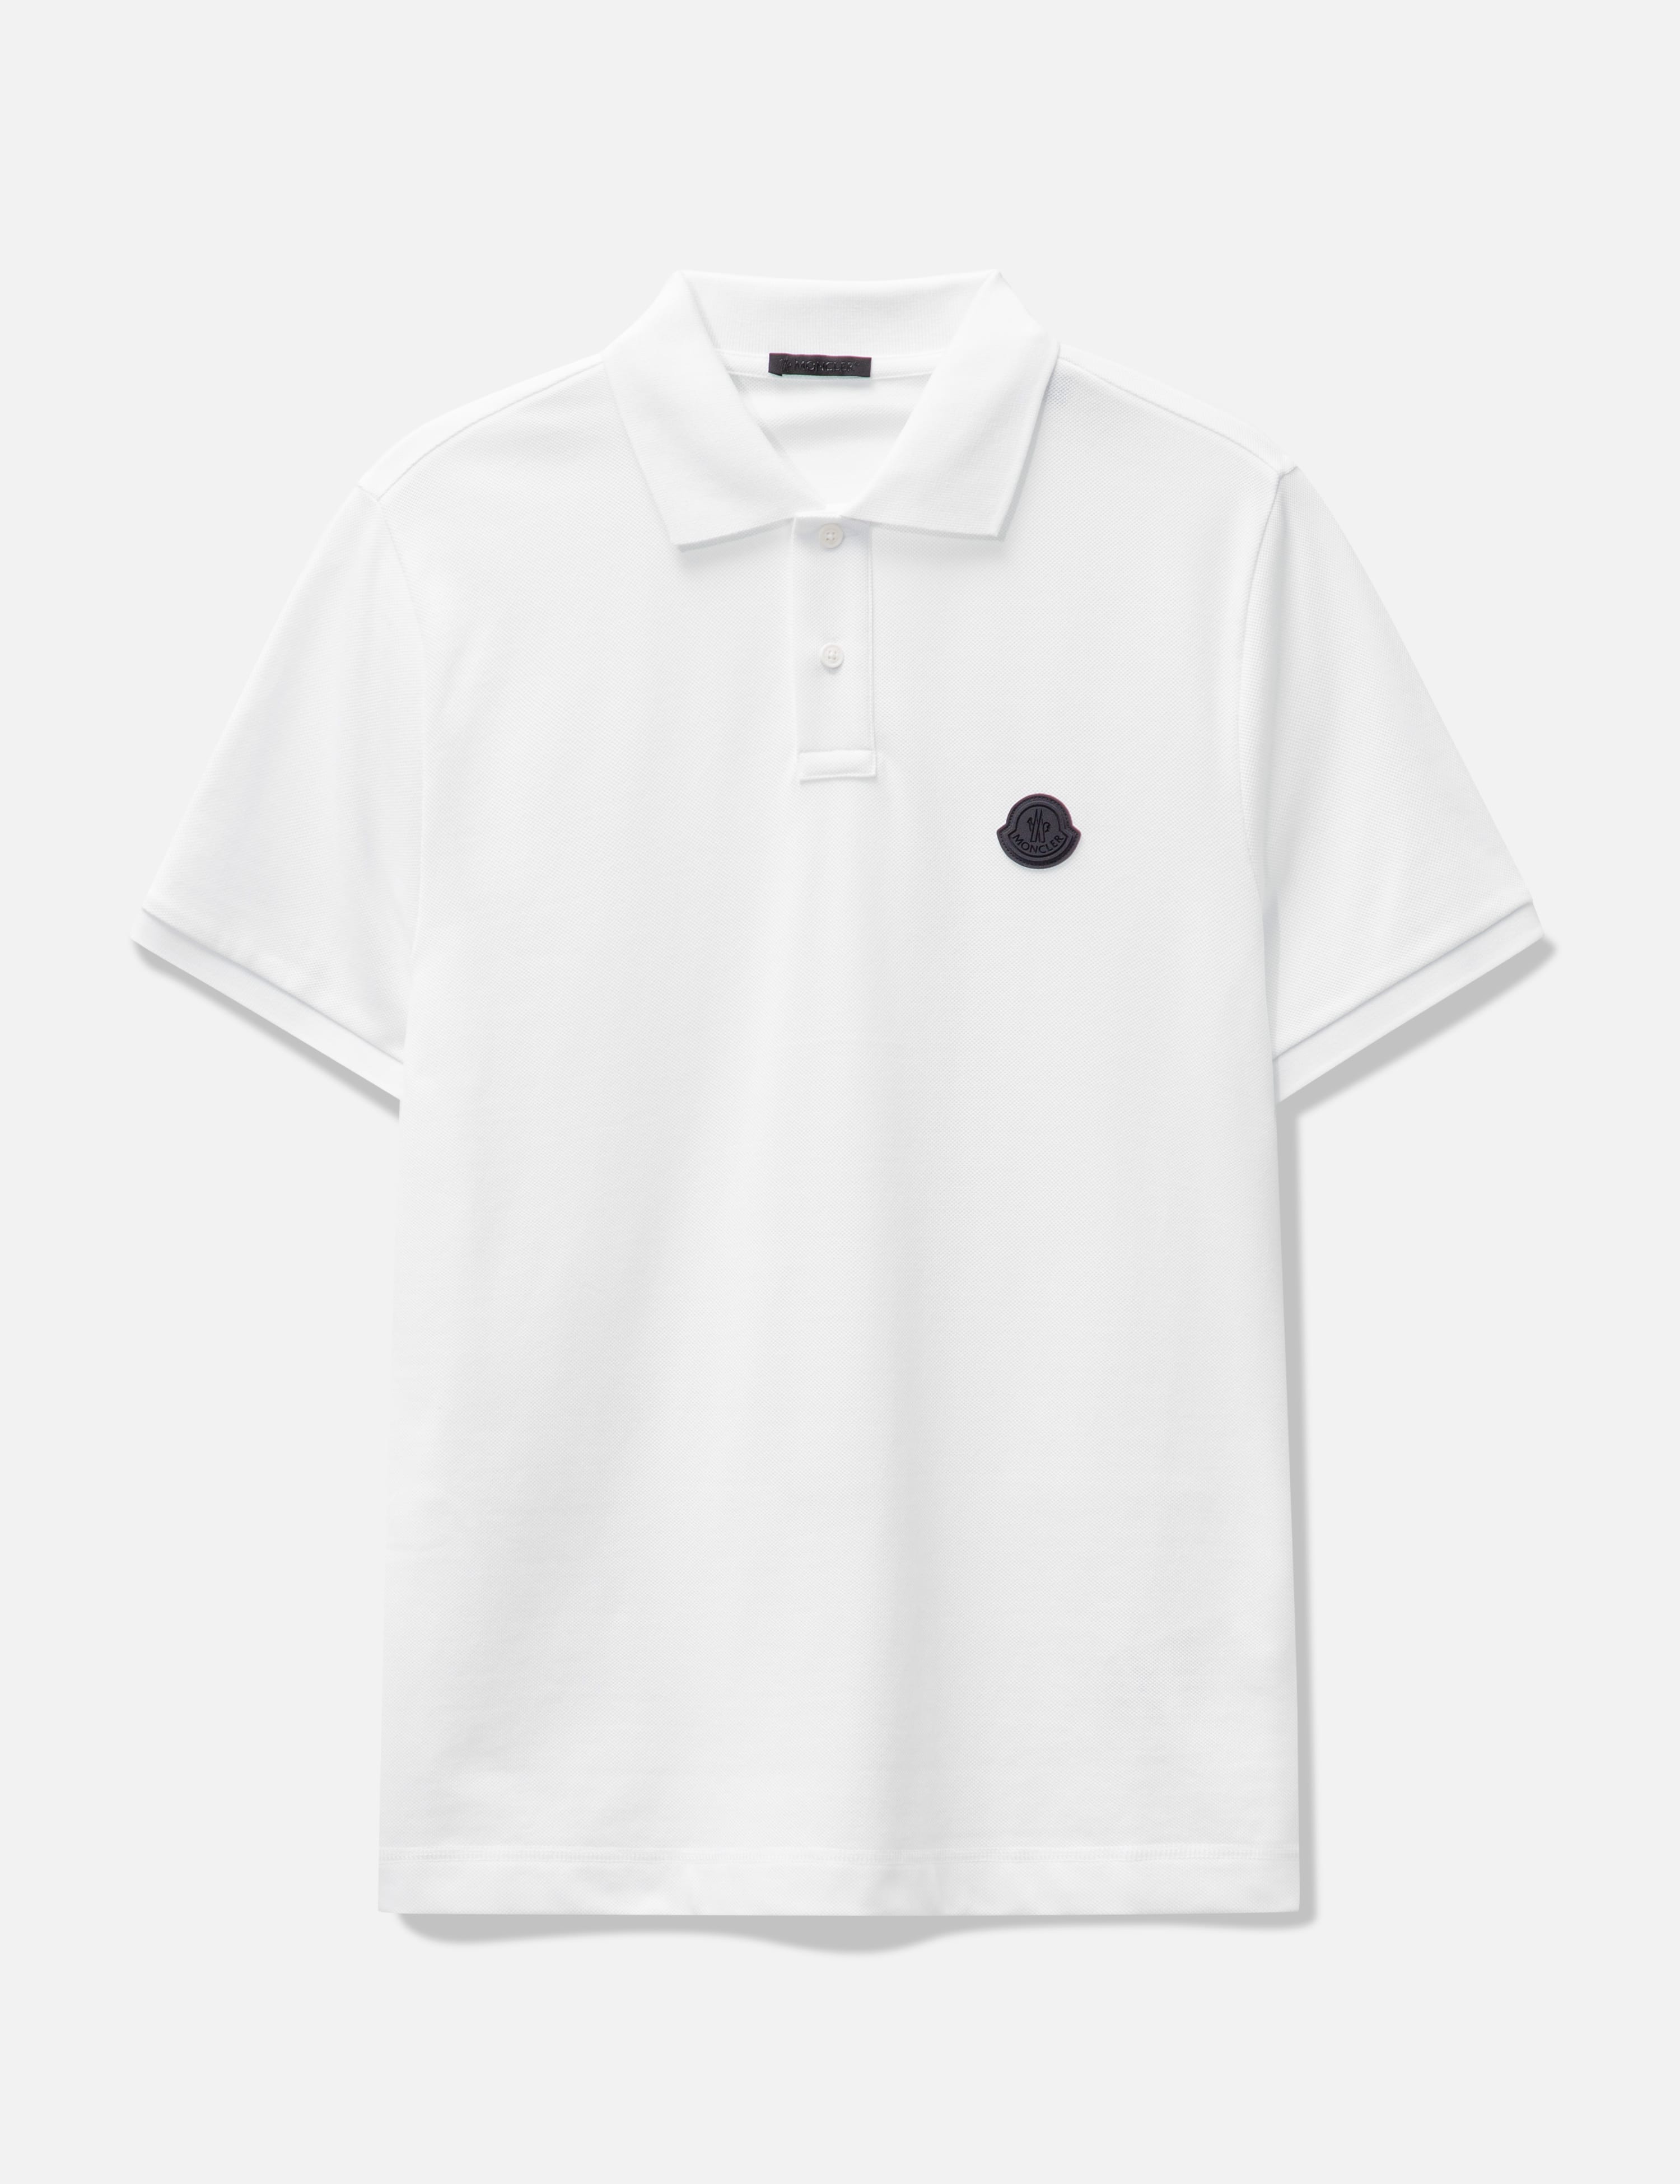 Moncler - Logo Polo Shirt | HBX - Globally Curated Fashion and